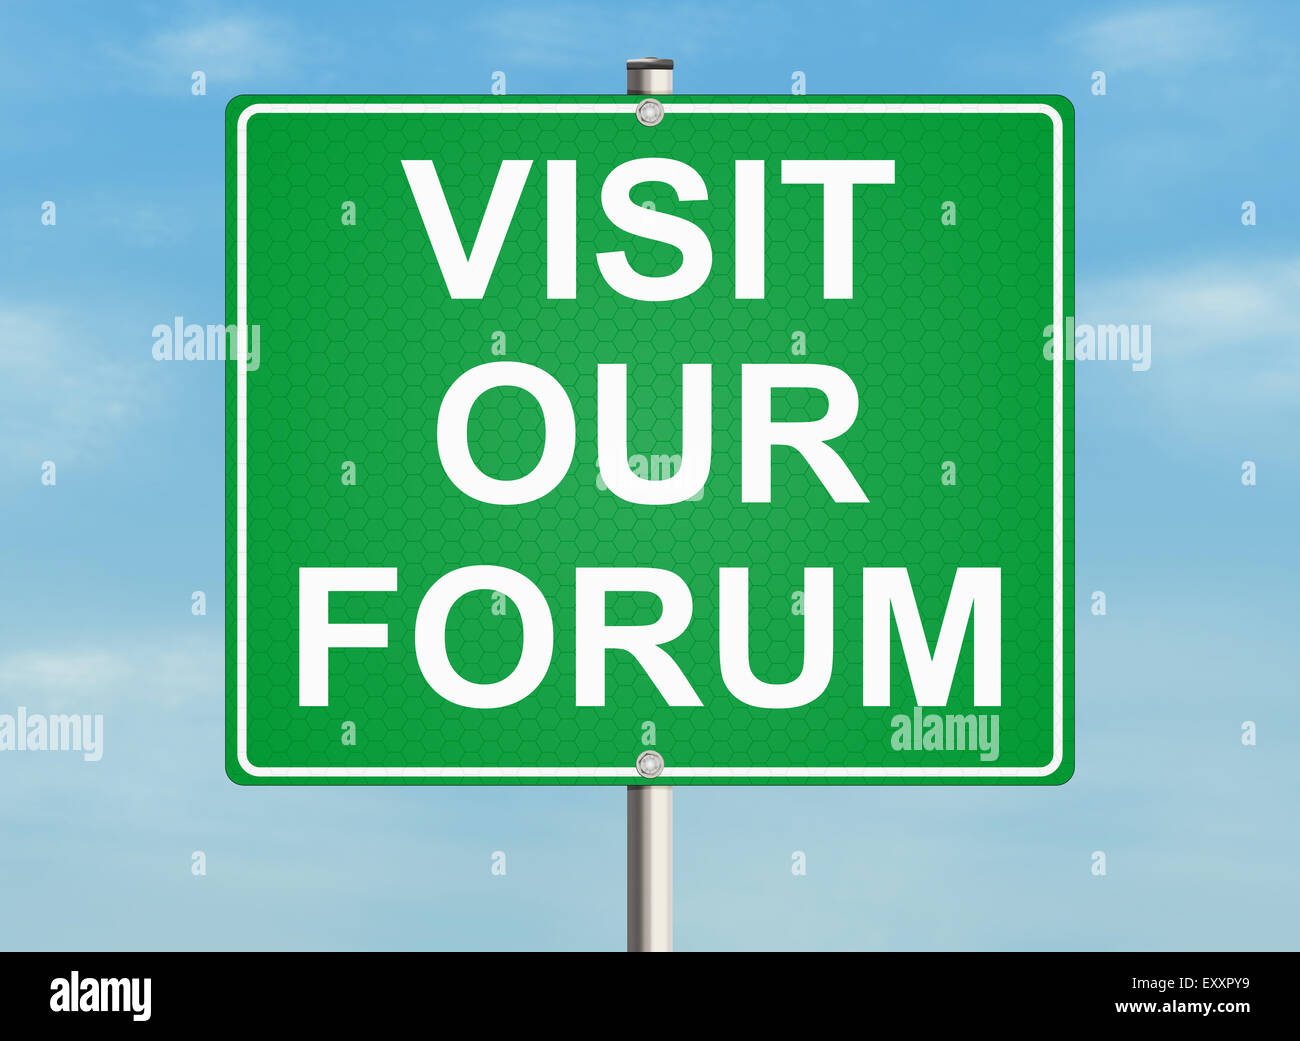 Forum. Road sign on the sky background. Raster illustration. Stock Photo